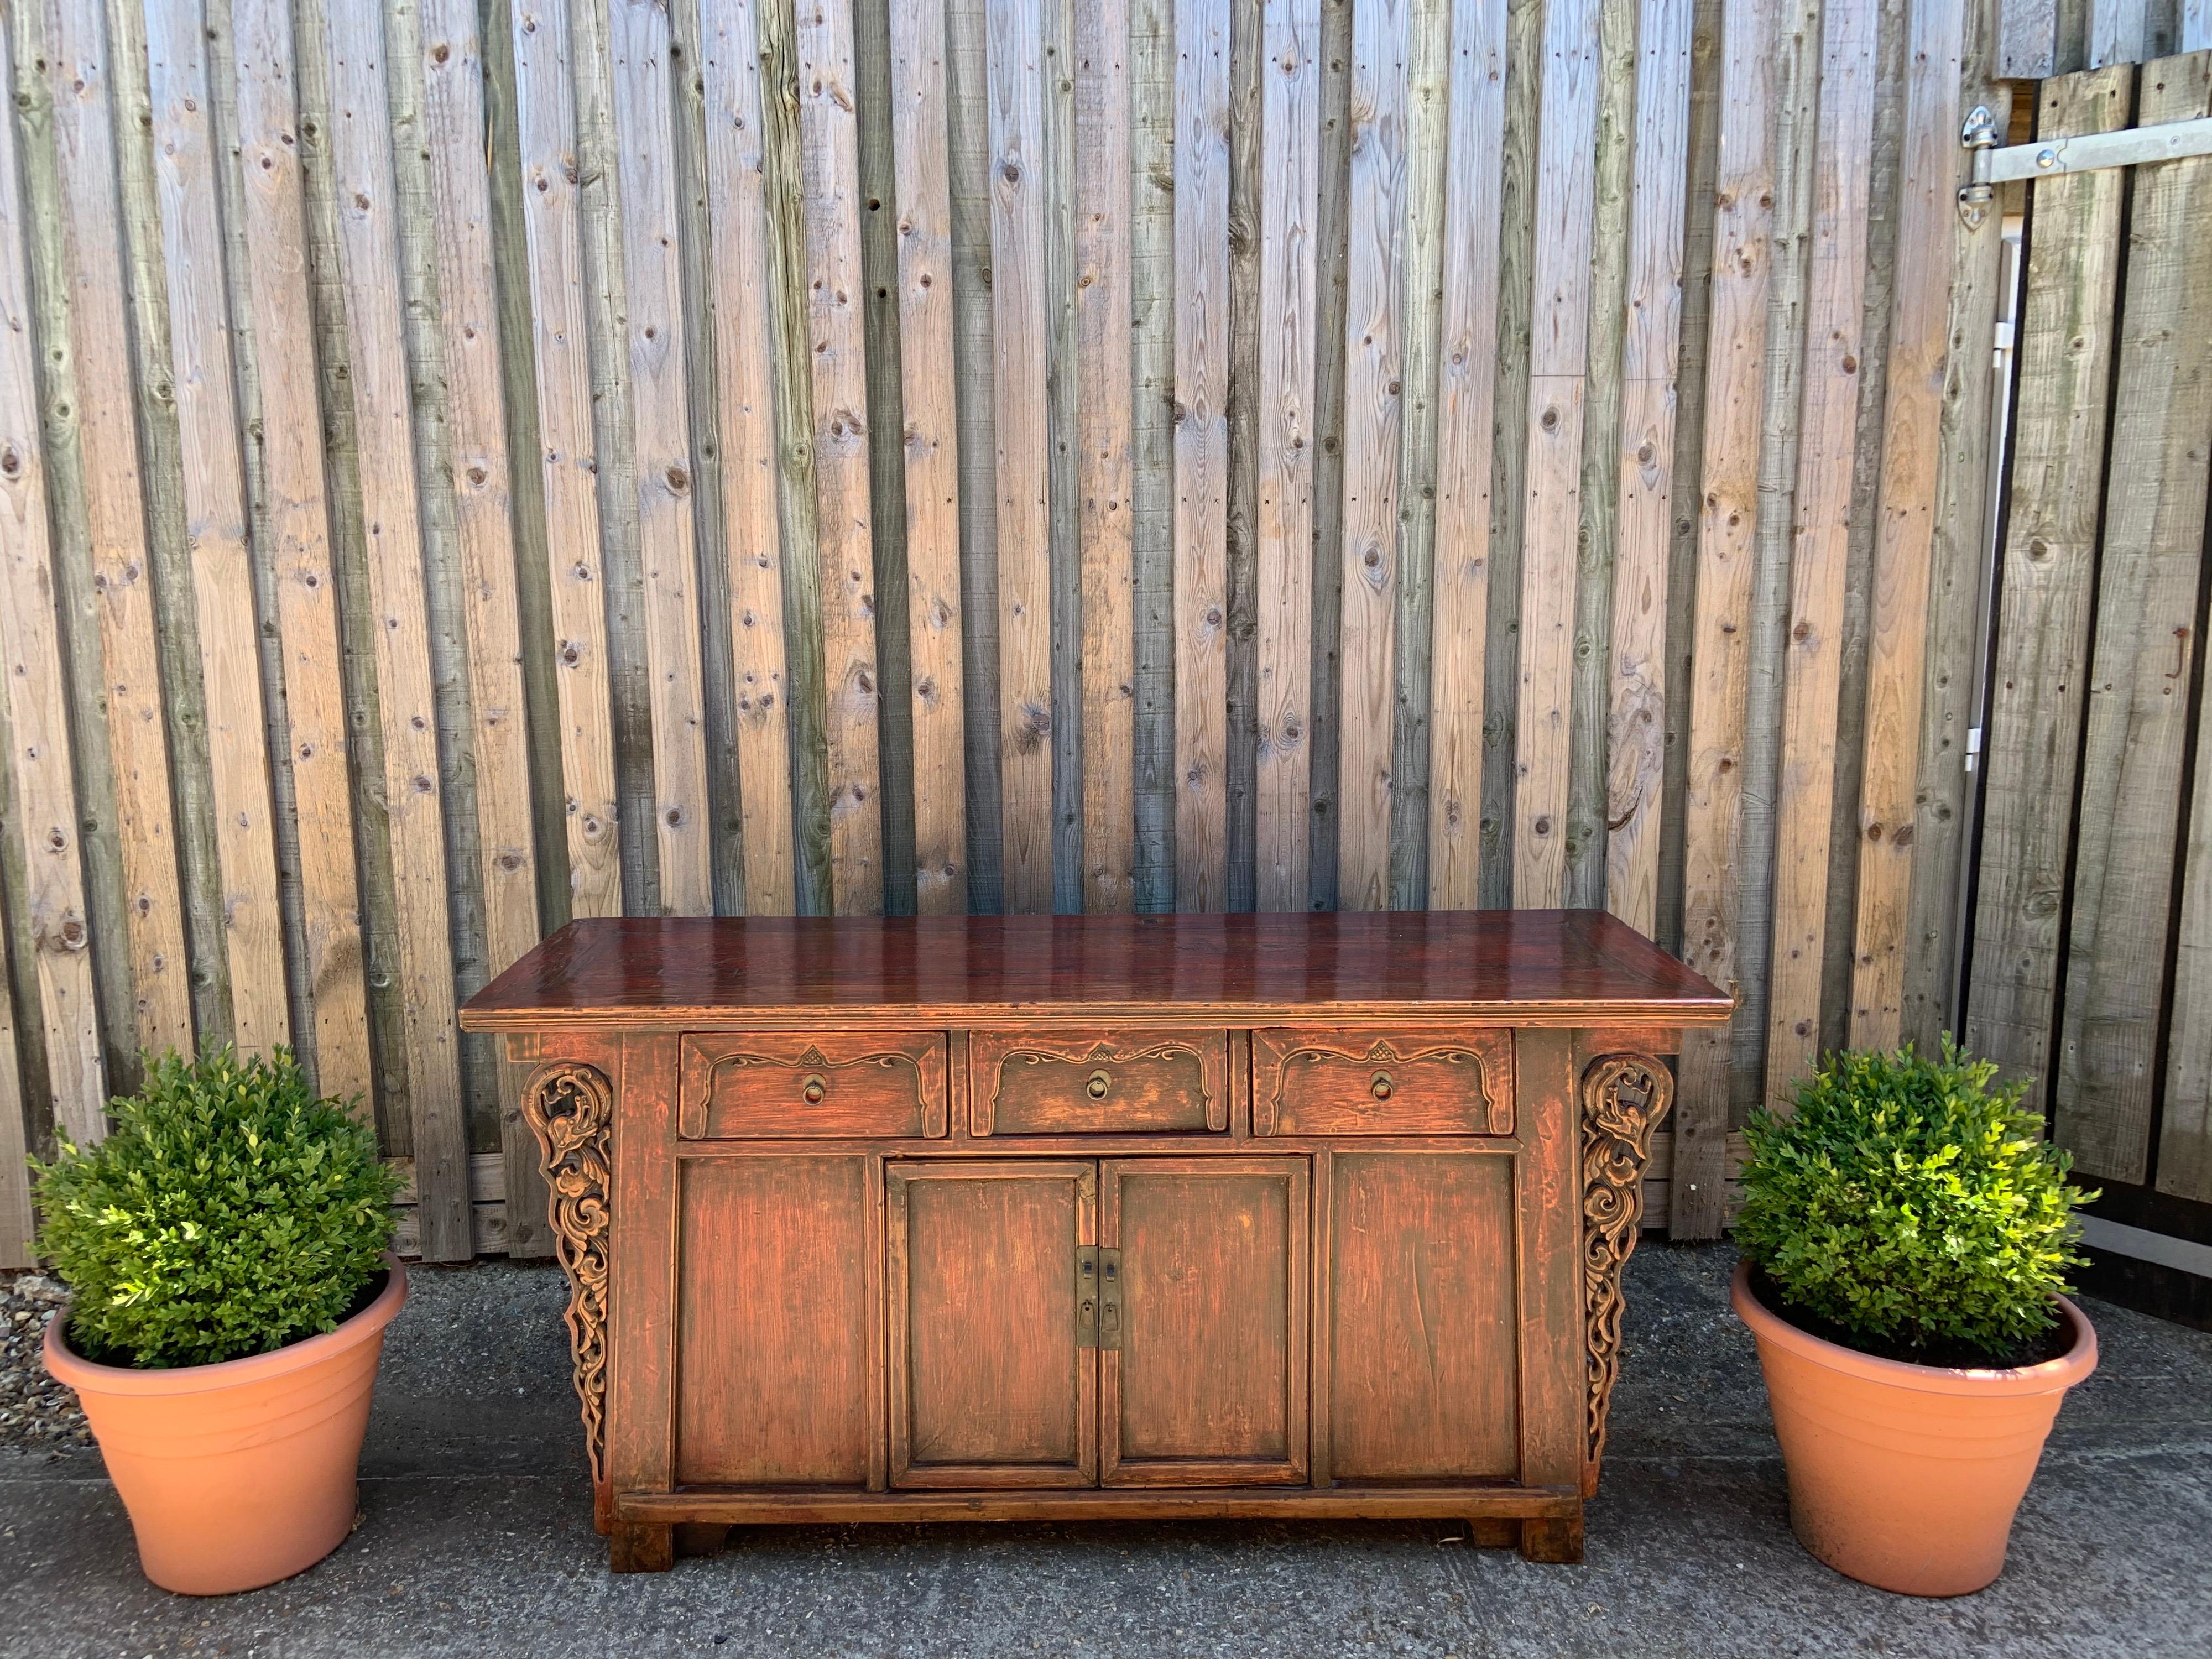 Mid-19th century elm Chinese sideboard finished in clear matte lacquer over reddish brown well patinated original color. The framed panel construction has relief dragon carving spandrels. The centre doors have wooden peg hinges that can be removed.